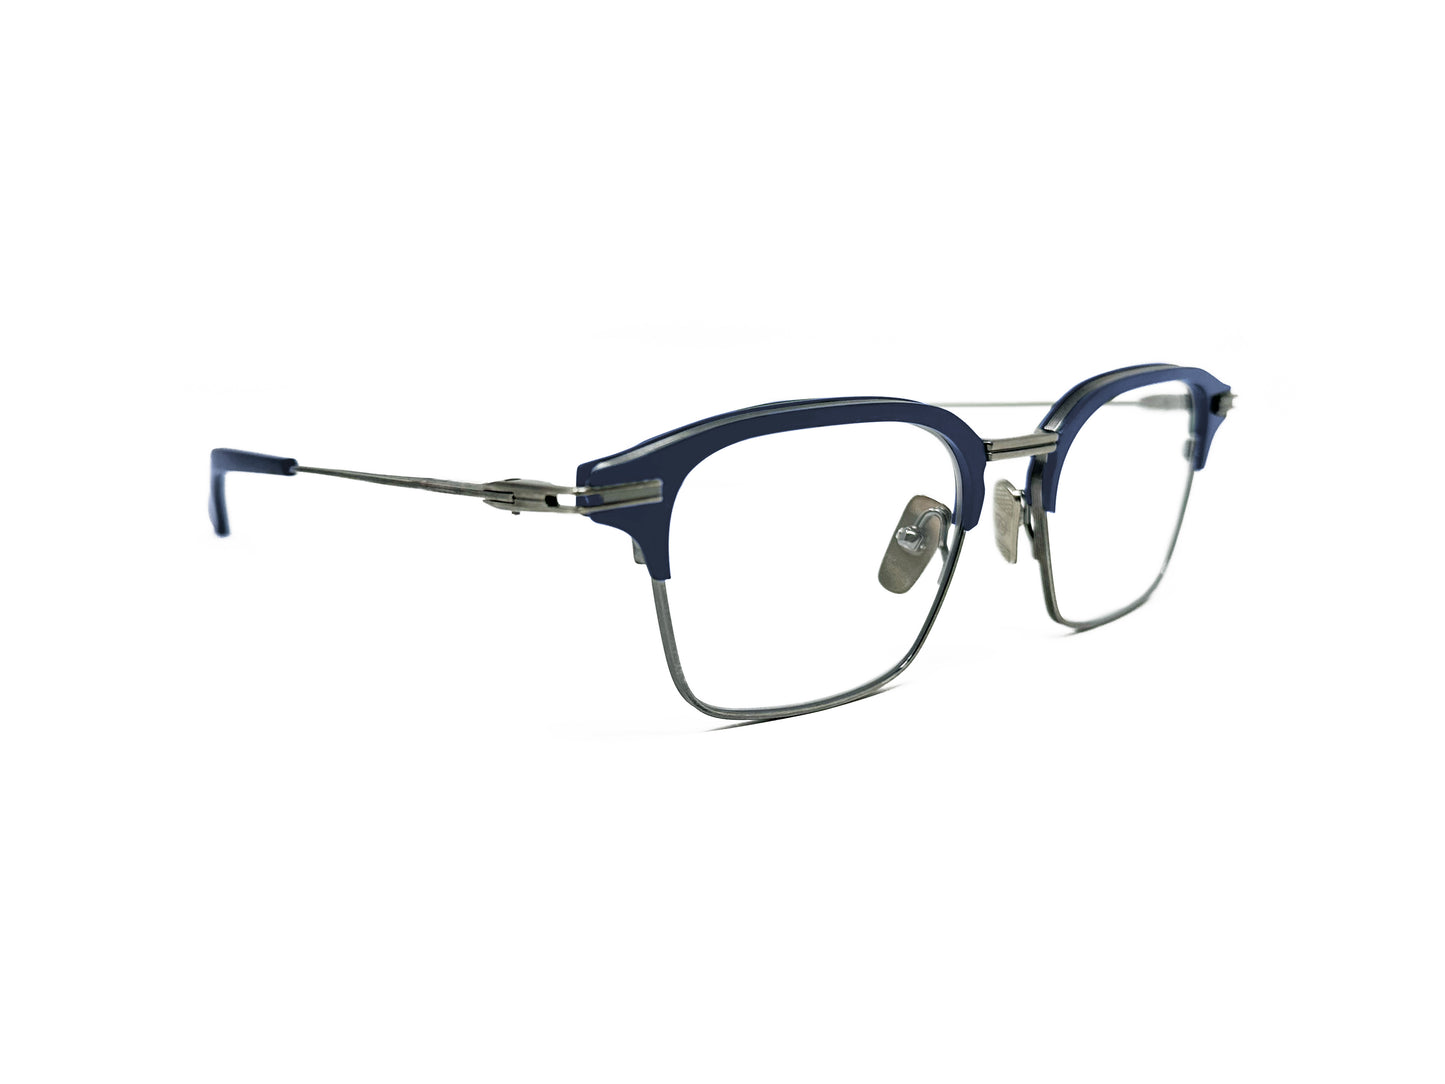 Dita Eyewear metal, half-rim, clubmaster style, optical frame. Model: Typographer. Color: 03 - Matte Navy and Antique Silver. Side view.